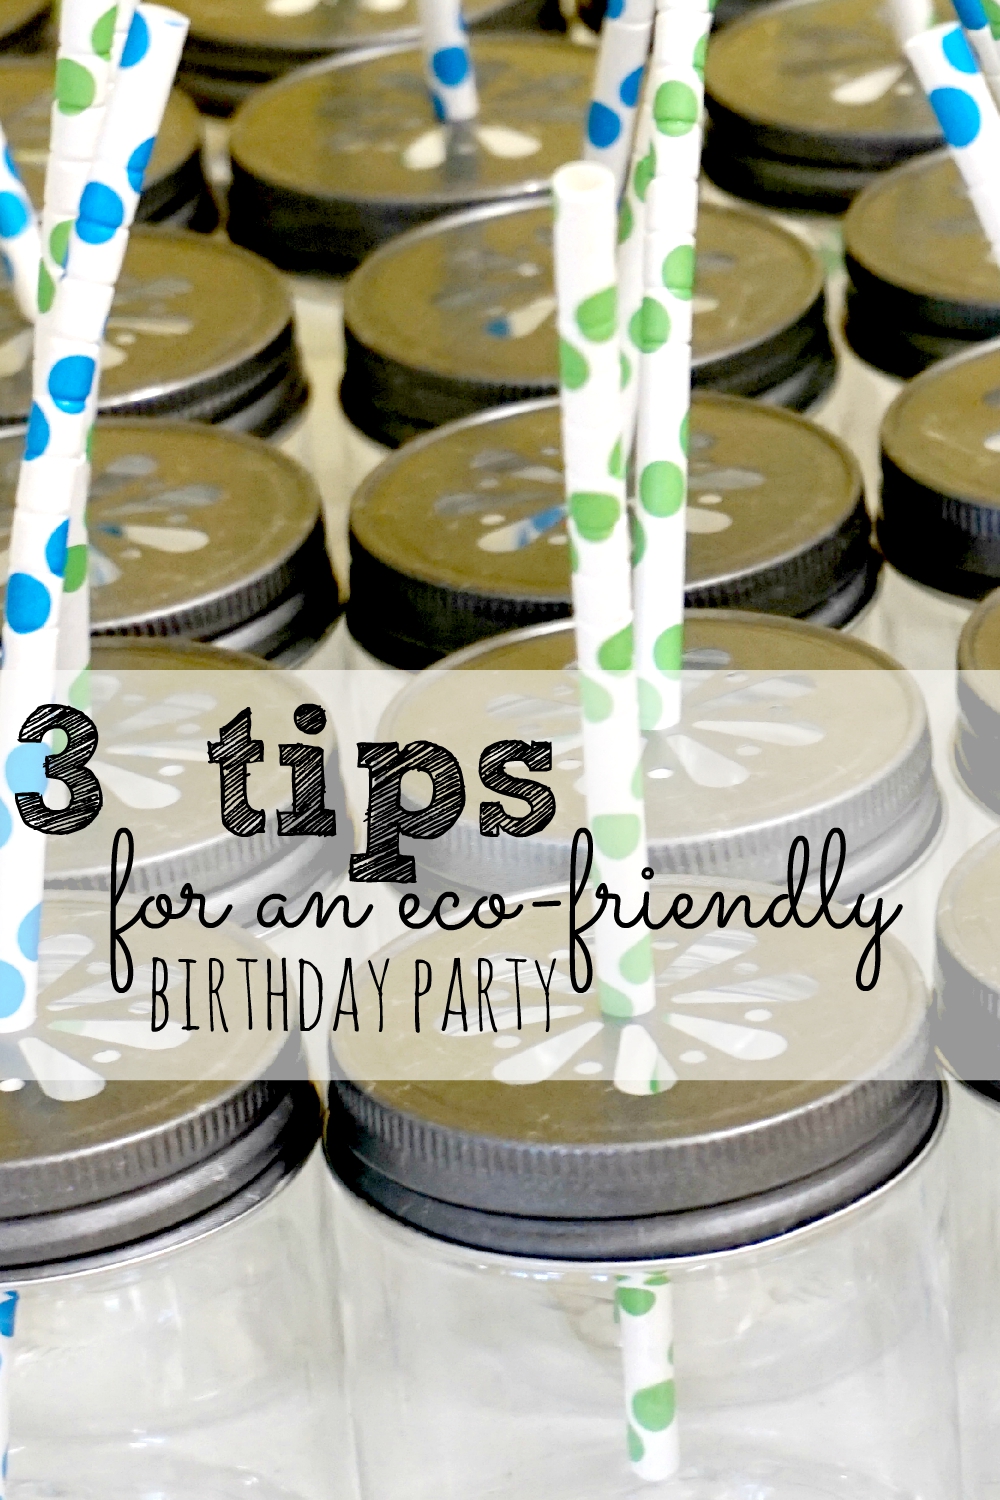 So you want to throw an eco-friendly birthday party? Don't lose out on these 3 essentials!